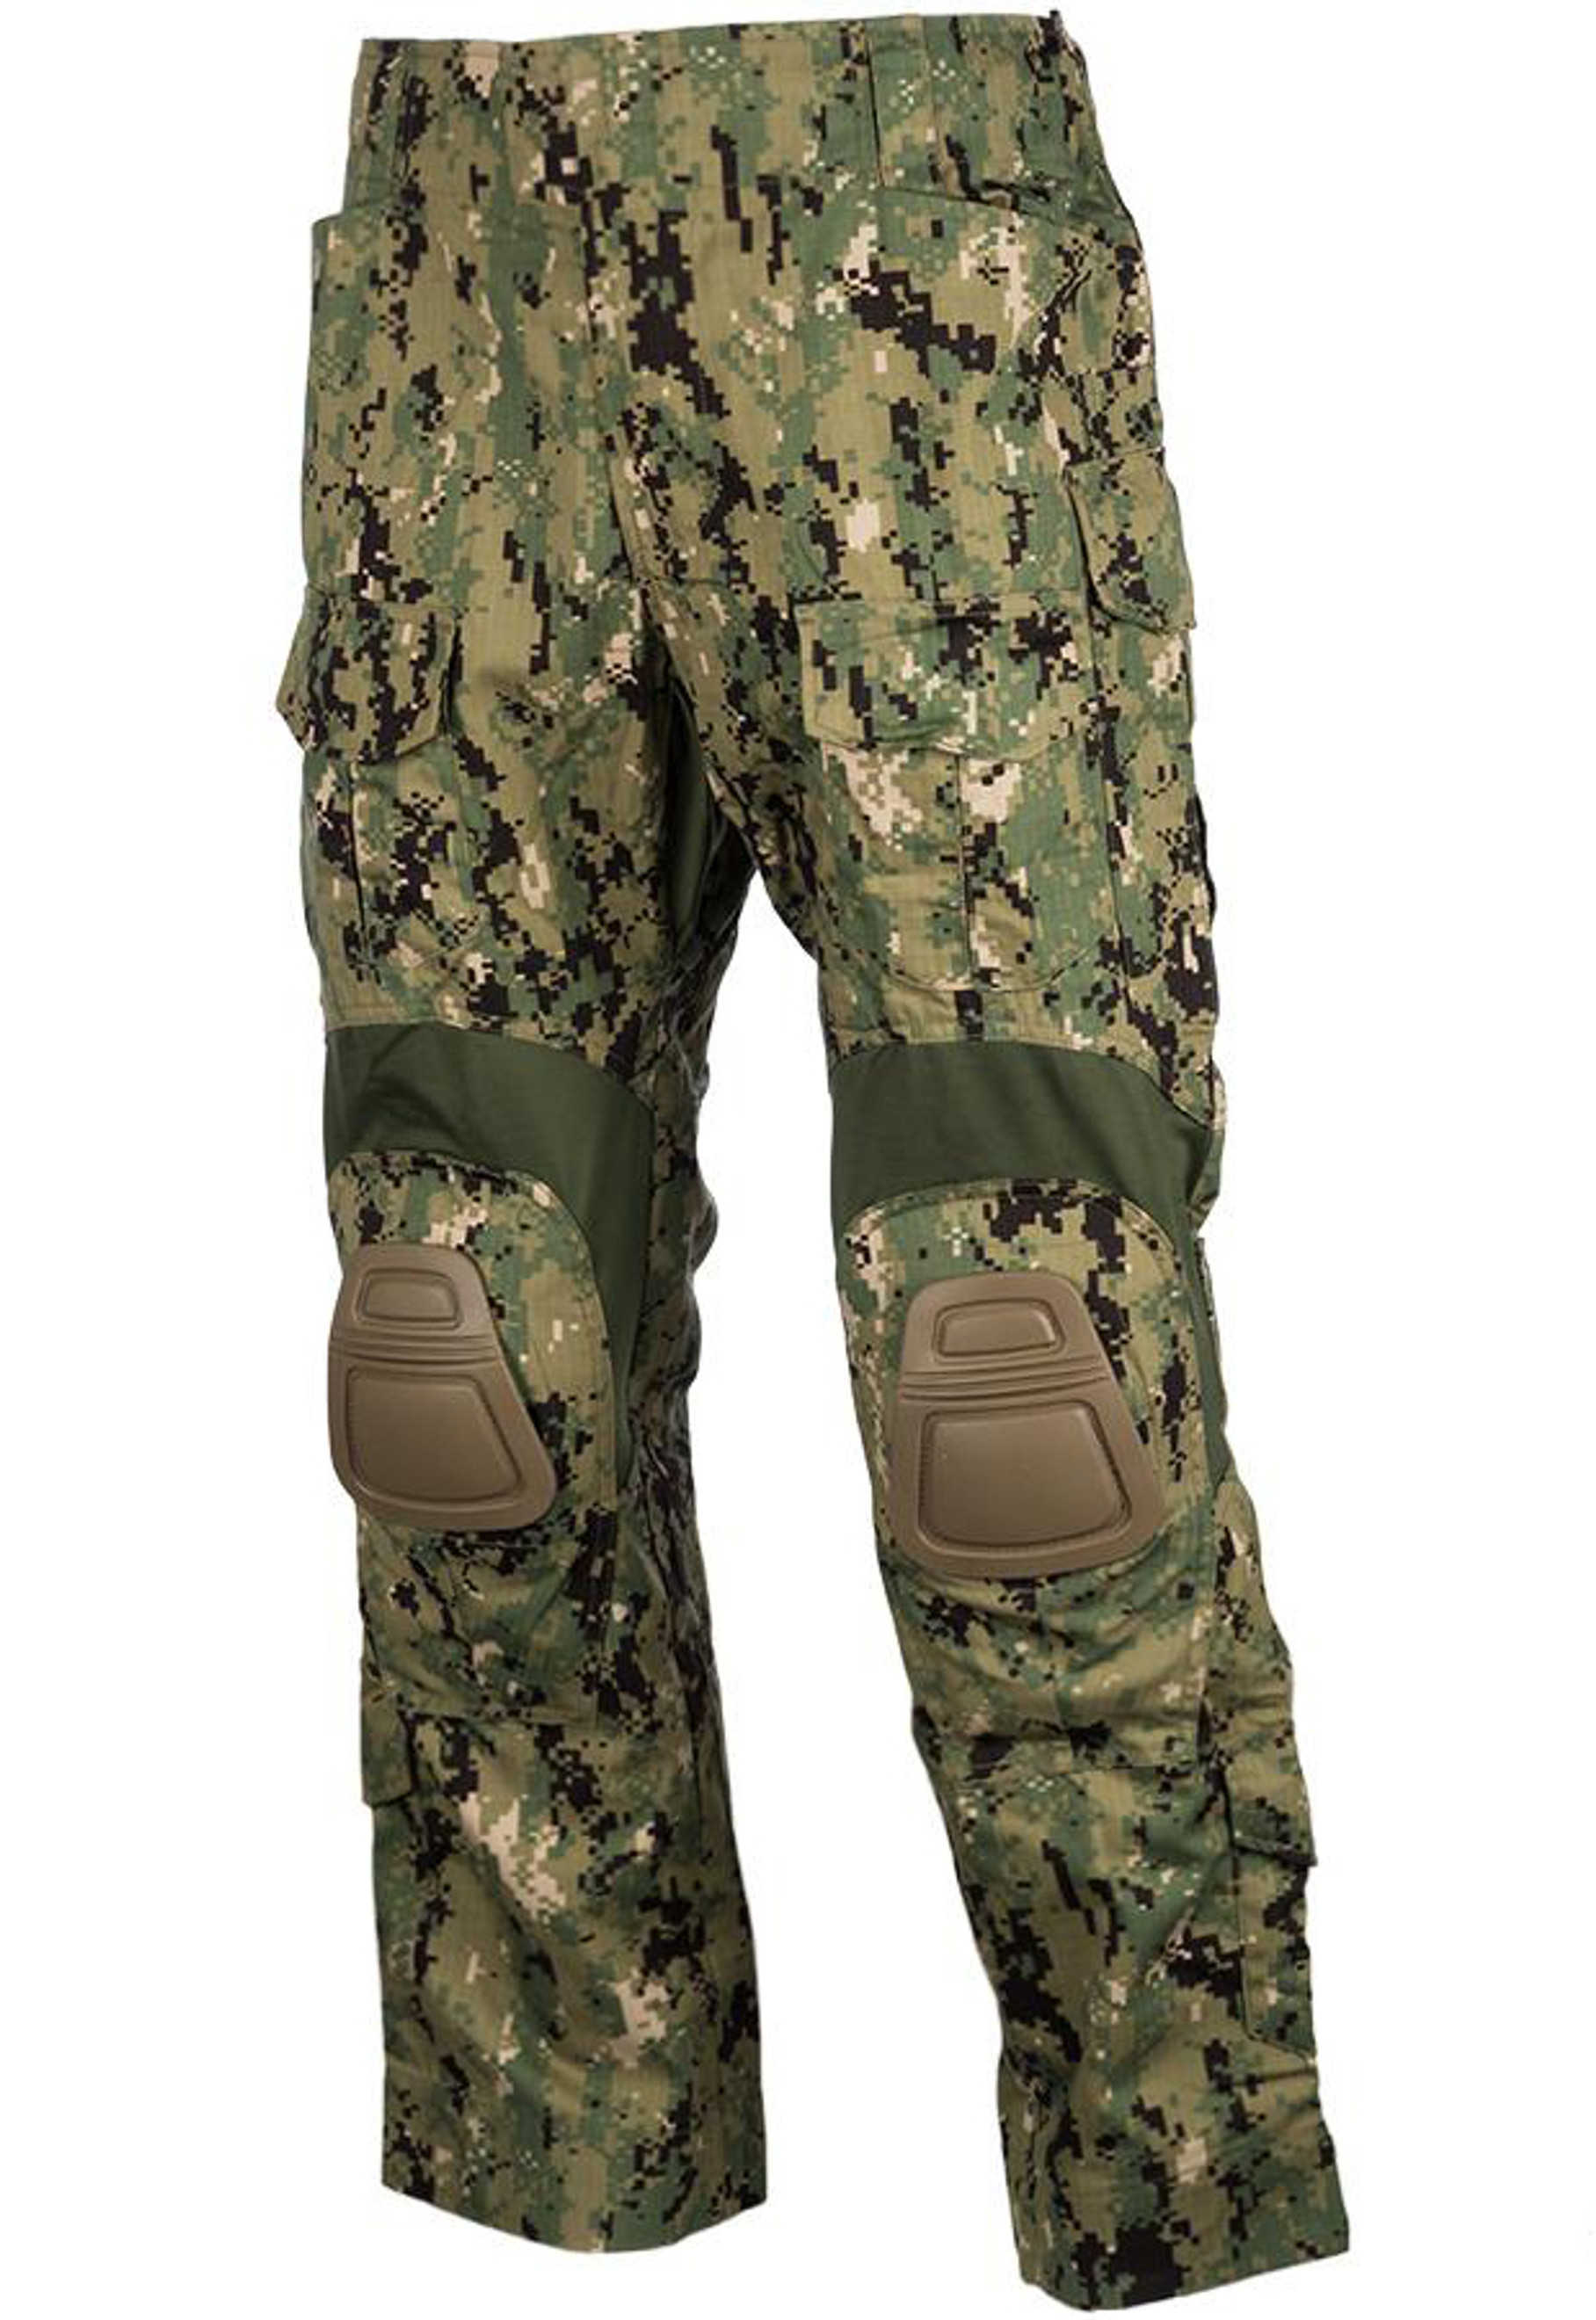 EmersonGear Blue Label Combat Pants w/ Integrated Knee Pads (Color: AOR2 / Size 36)